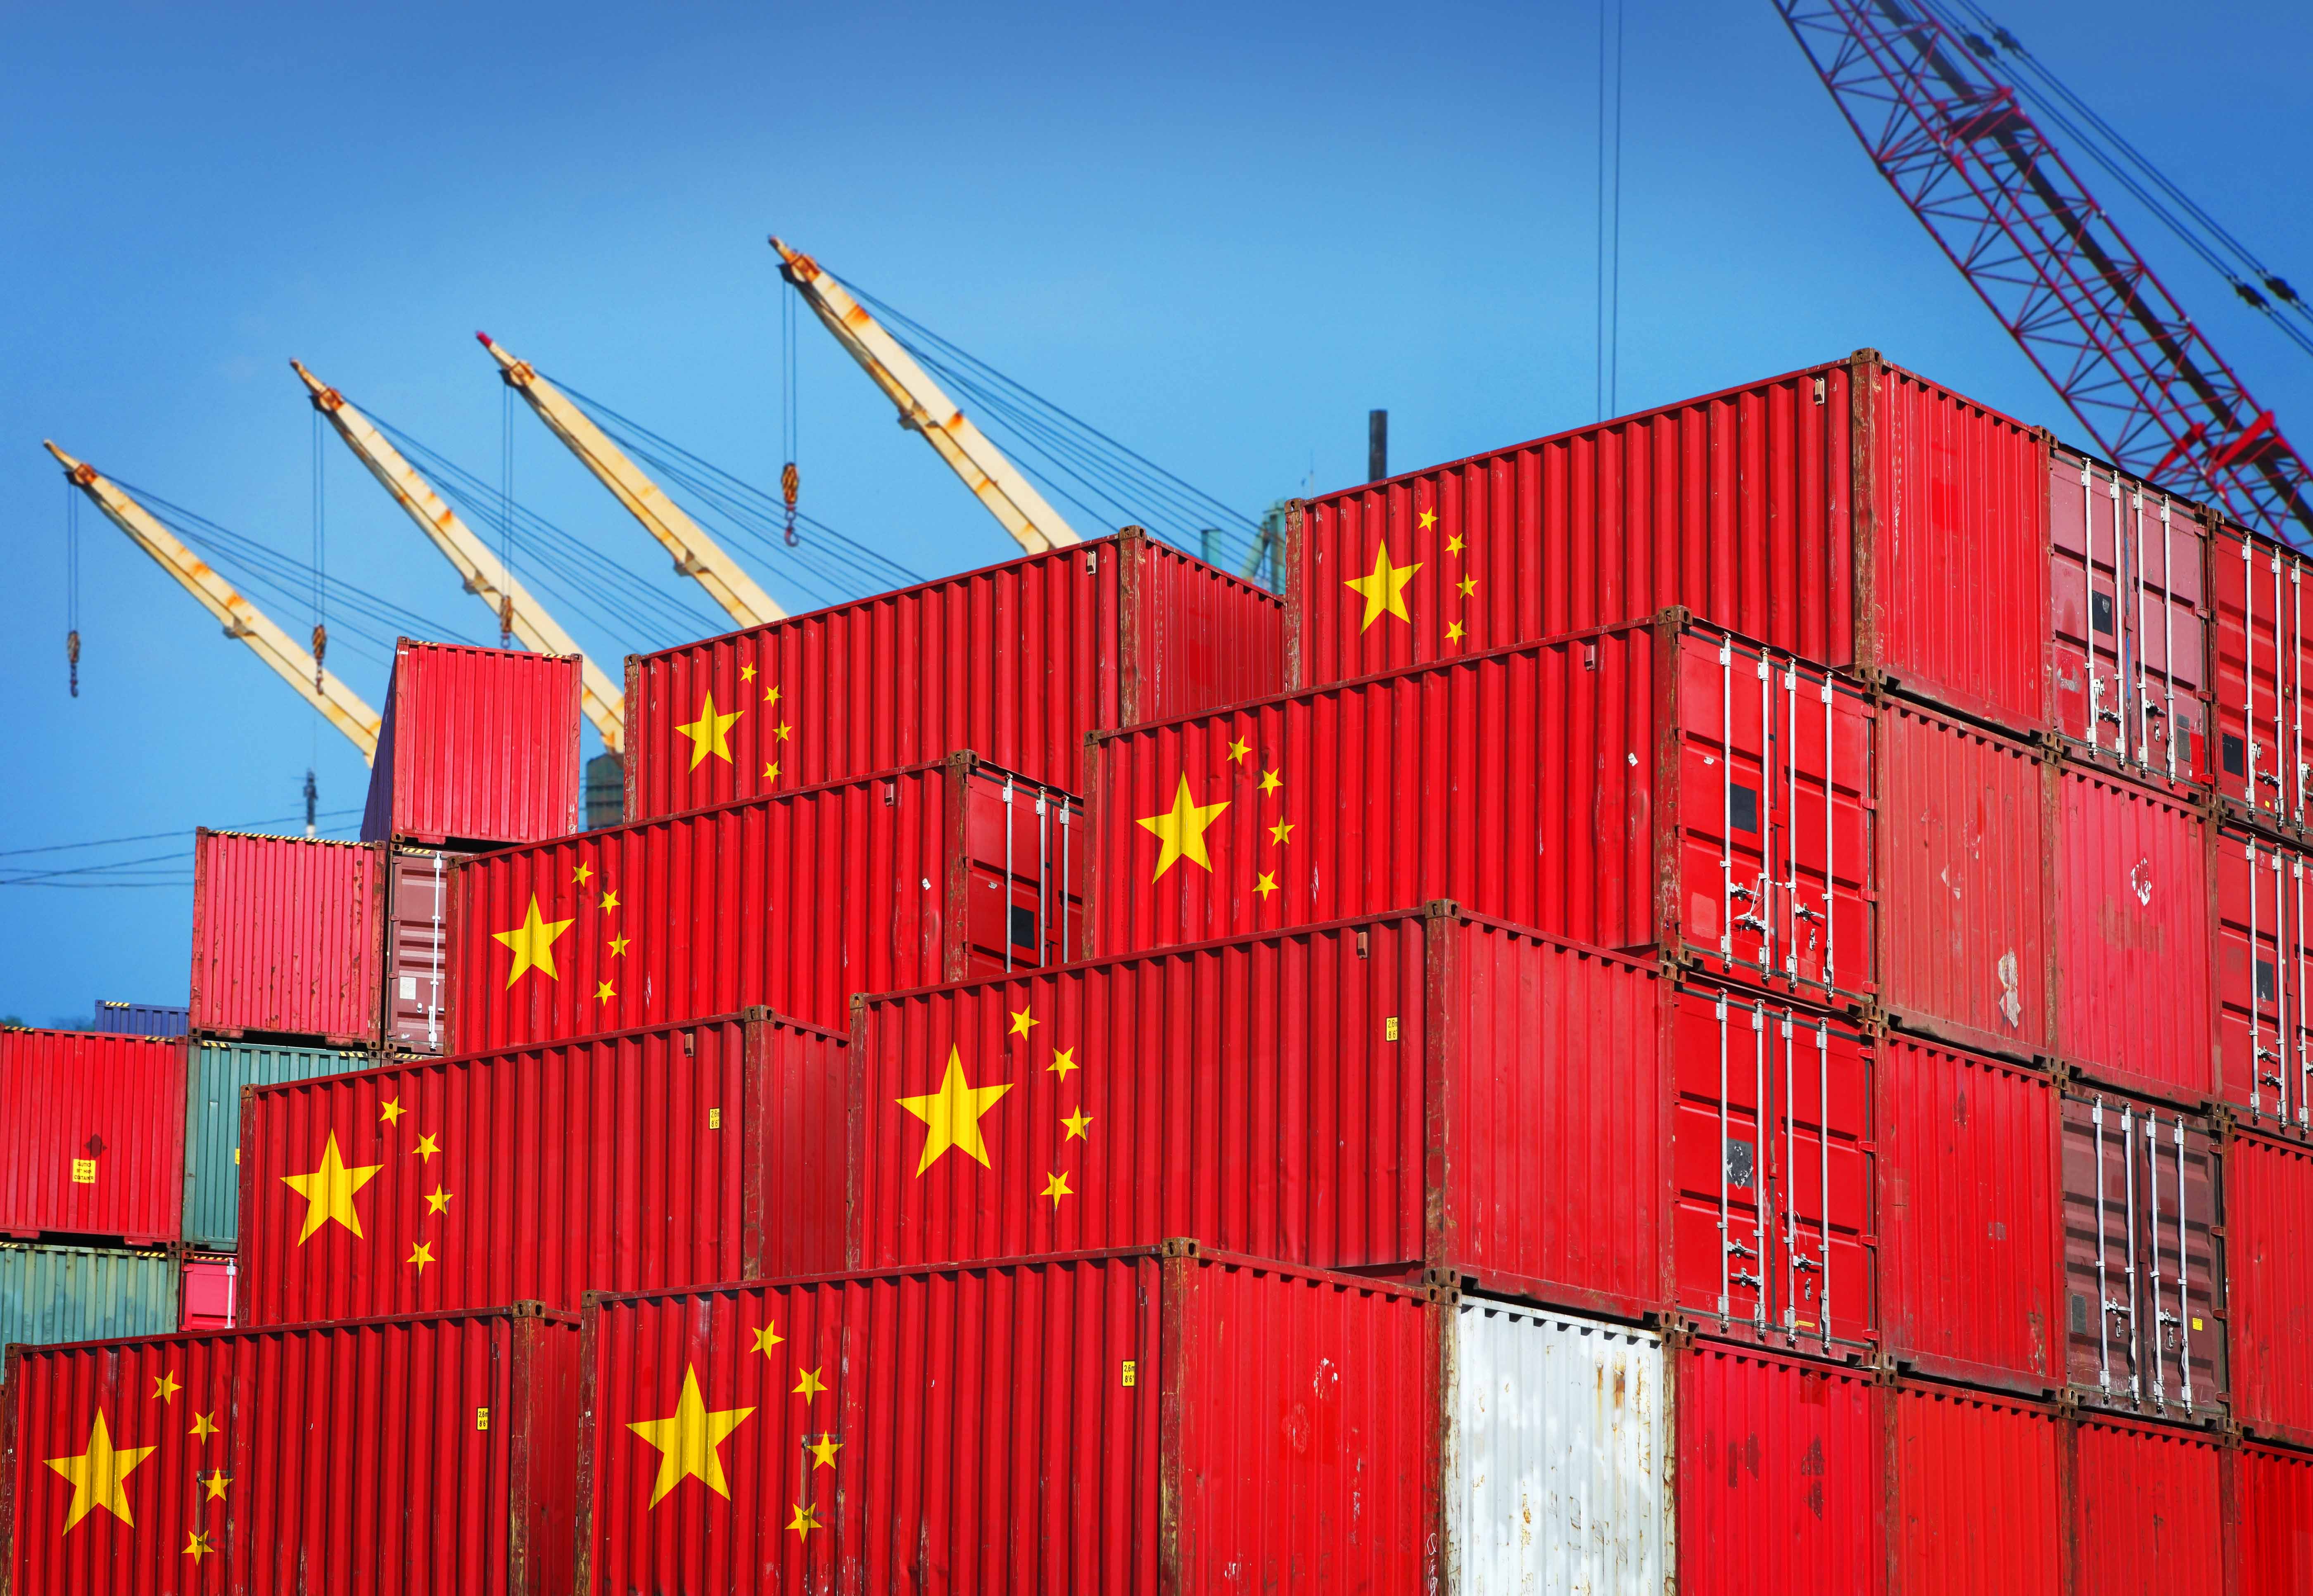 NEW REPORT: Lessons from China’s rise: The “China Shock” challenges economists’ benign view of the effect of trade integration on labor markets